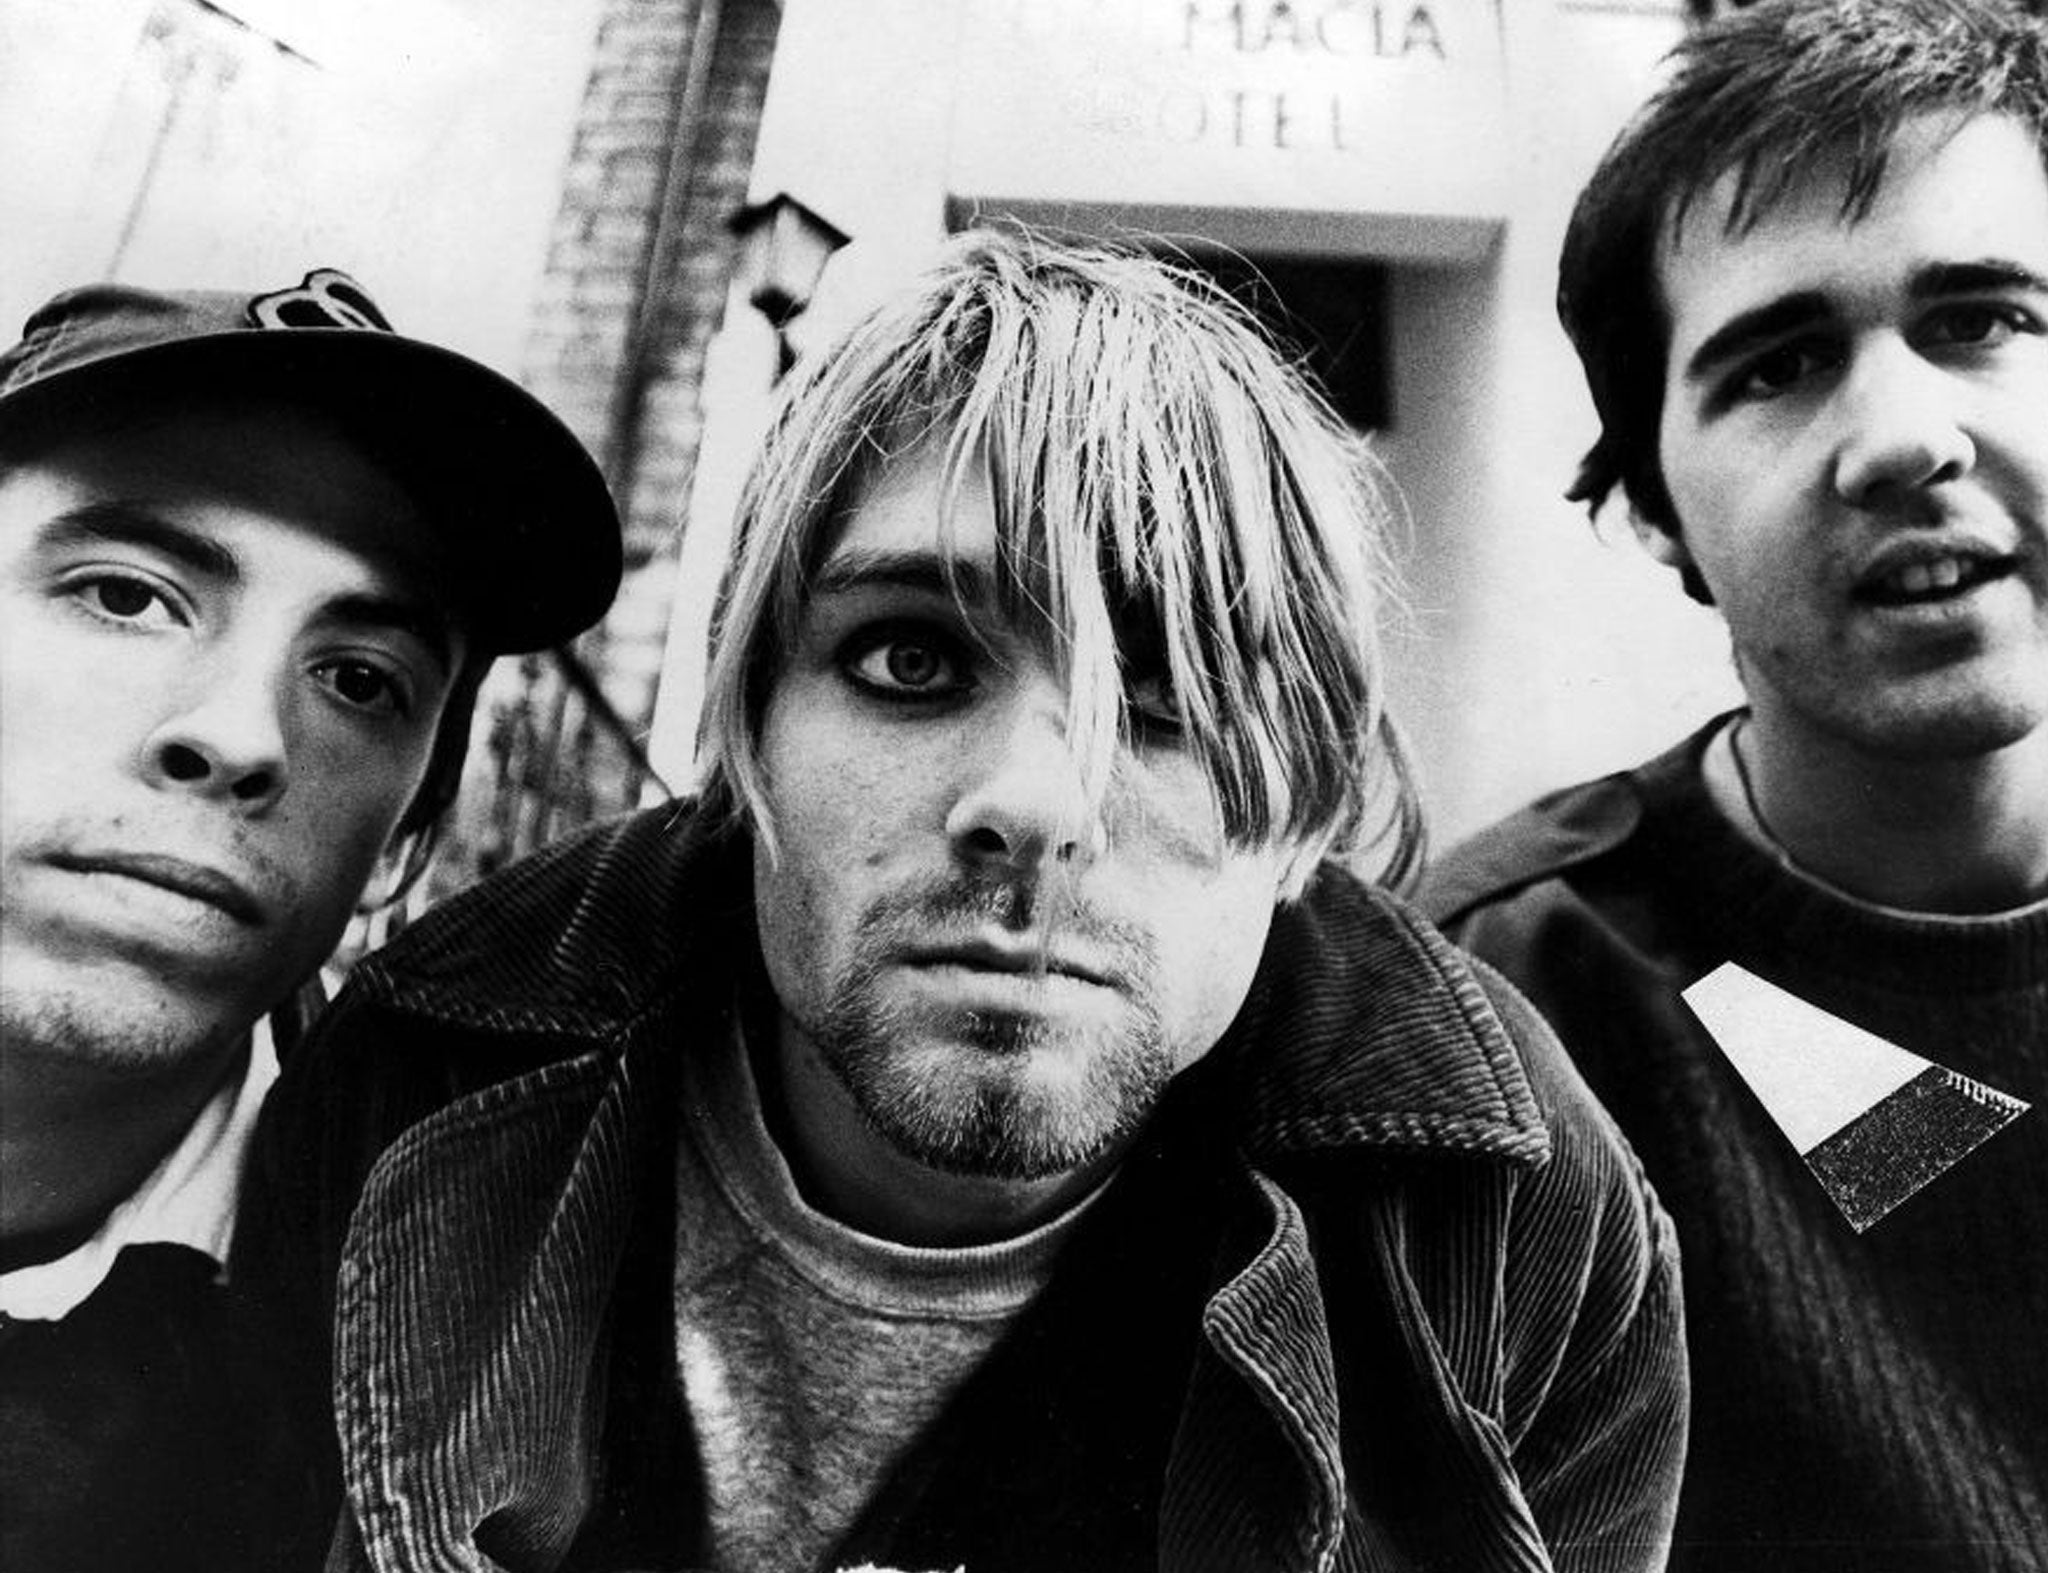 Cornered: (from left) Dave Grohl, Kurt Cobain, and Krist Novoselic of Nirvana